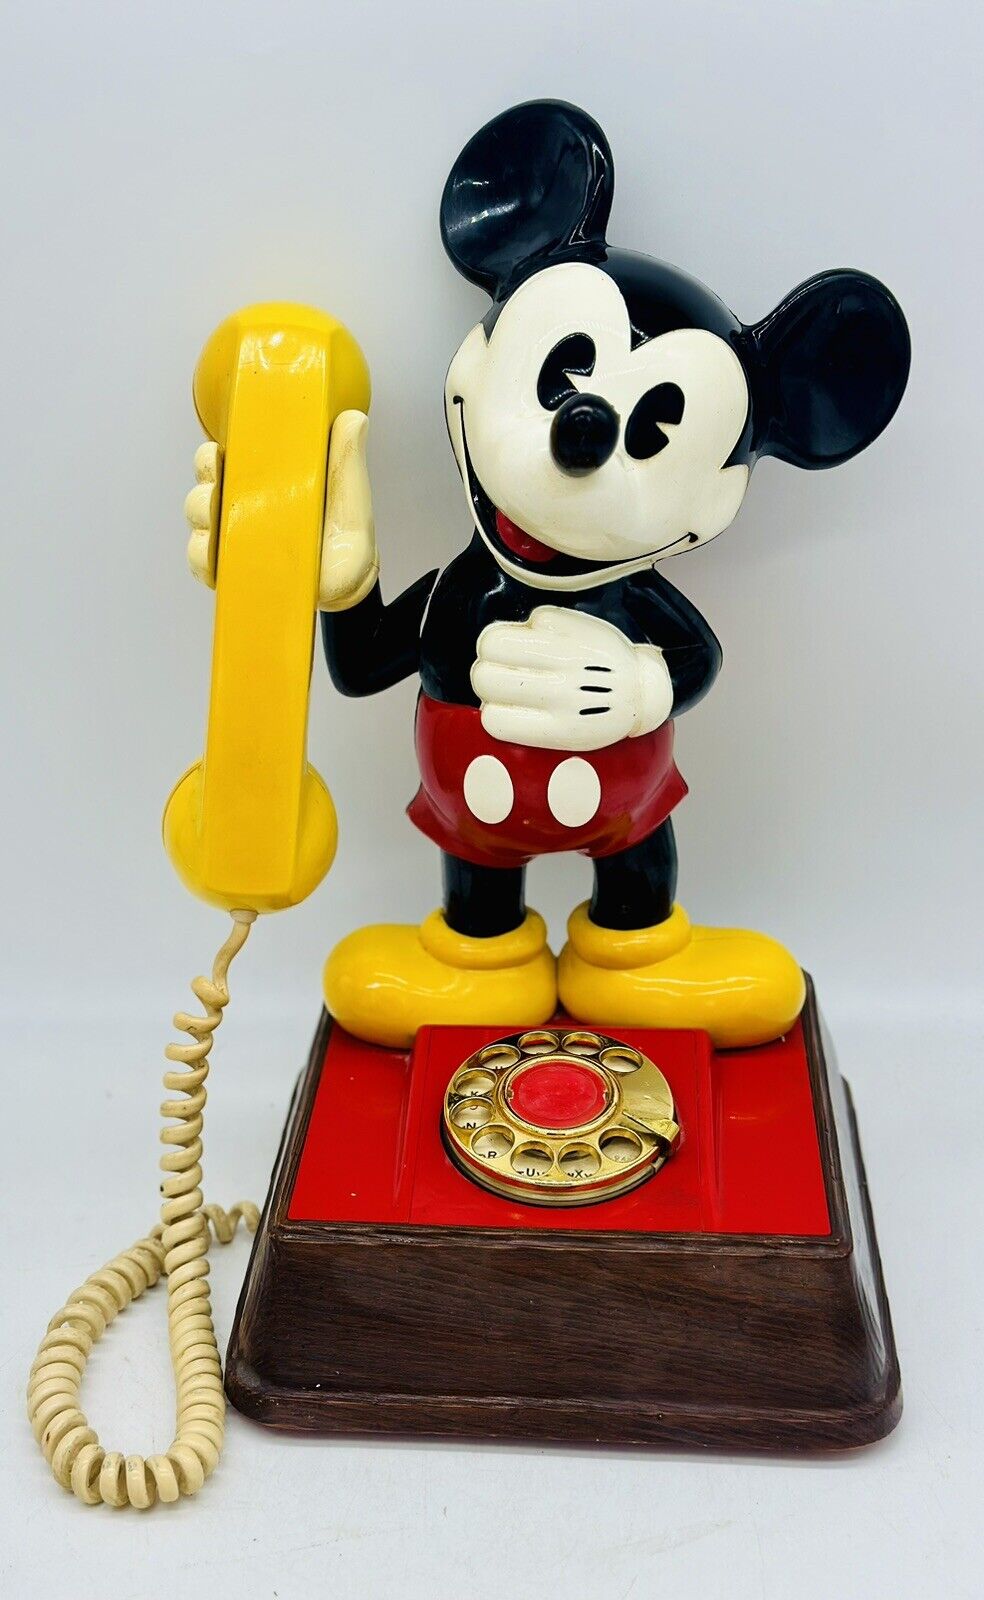 Vintage 1970’s Mickey Mouse Rotary Telephone Walt Disney 1976 Mickey Mouse phone